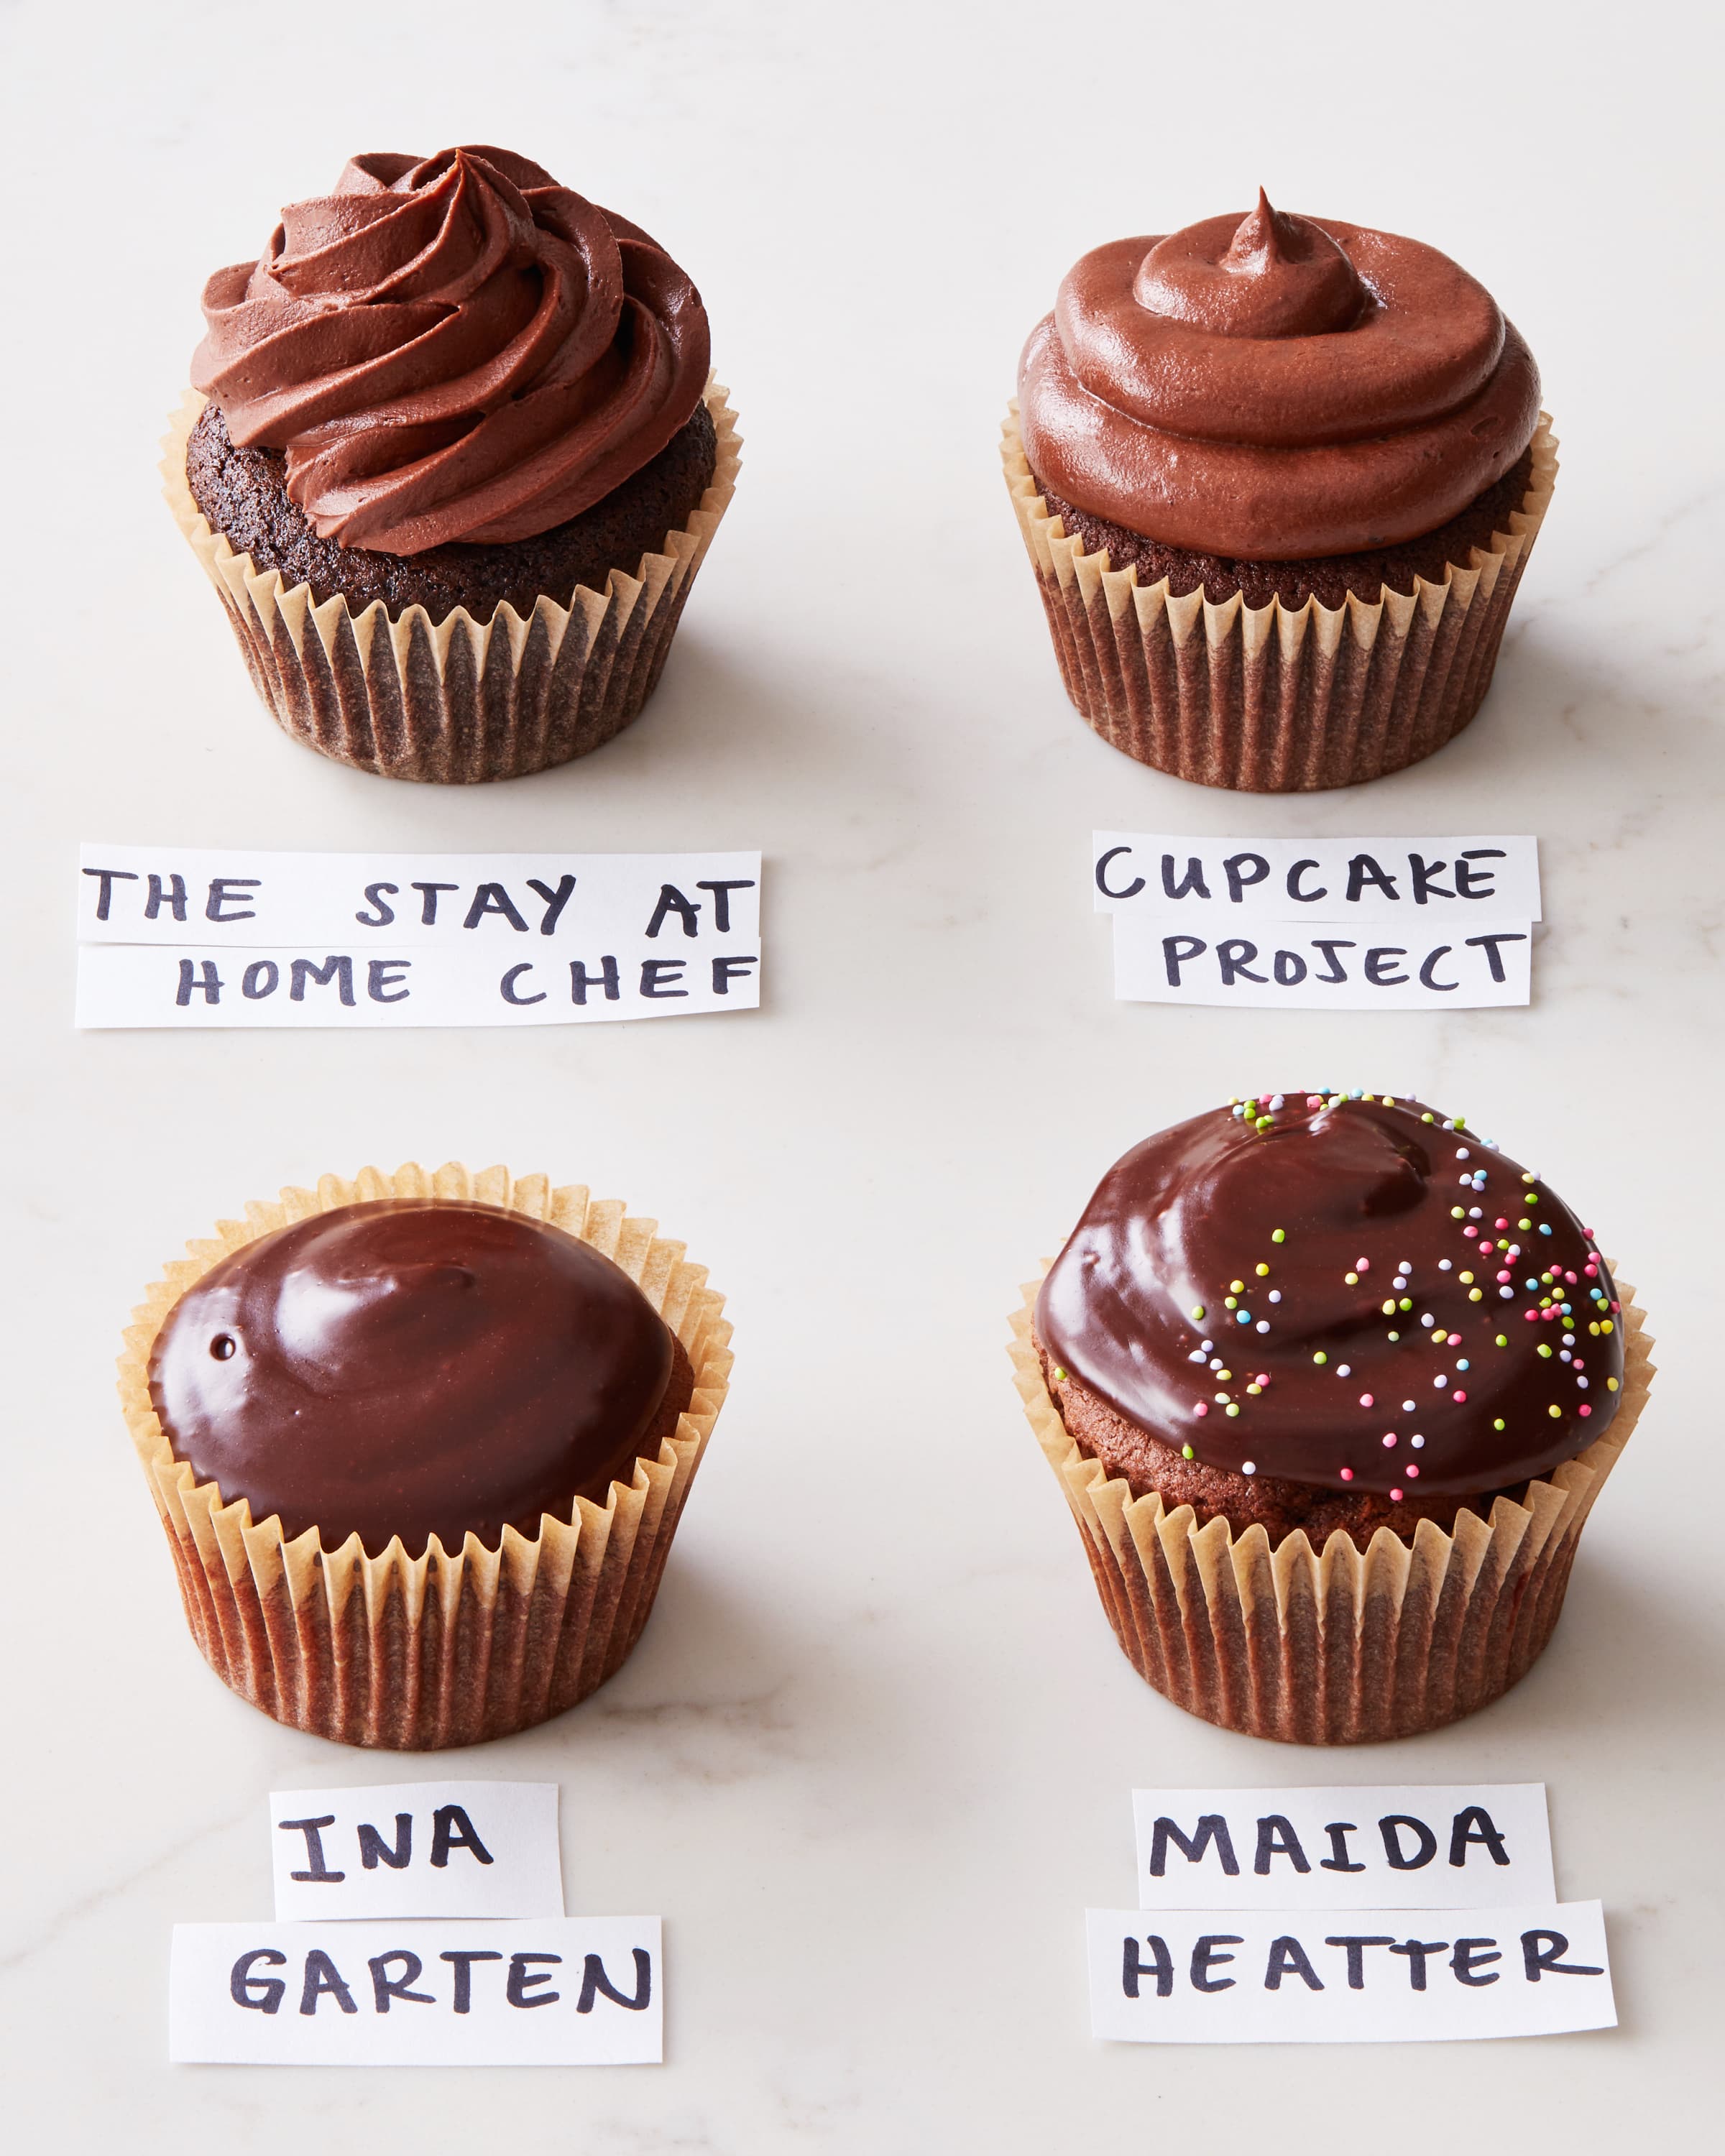 I Tried Four Popular Chocolate Cupcake Recipes and Found the Best ...